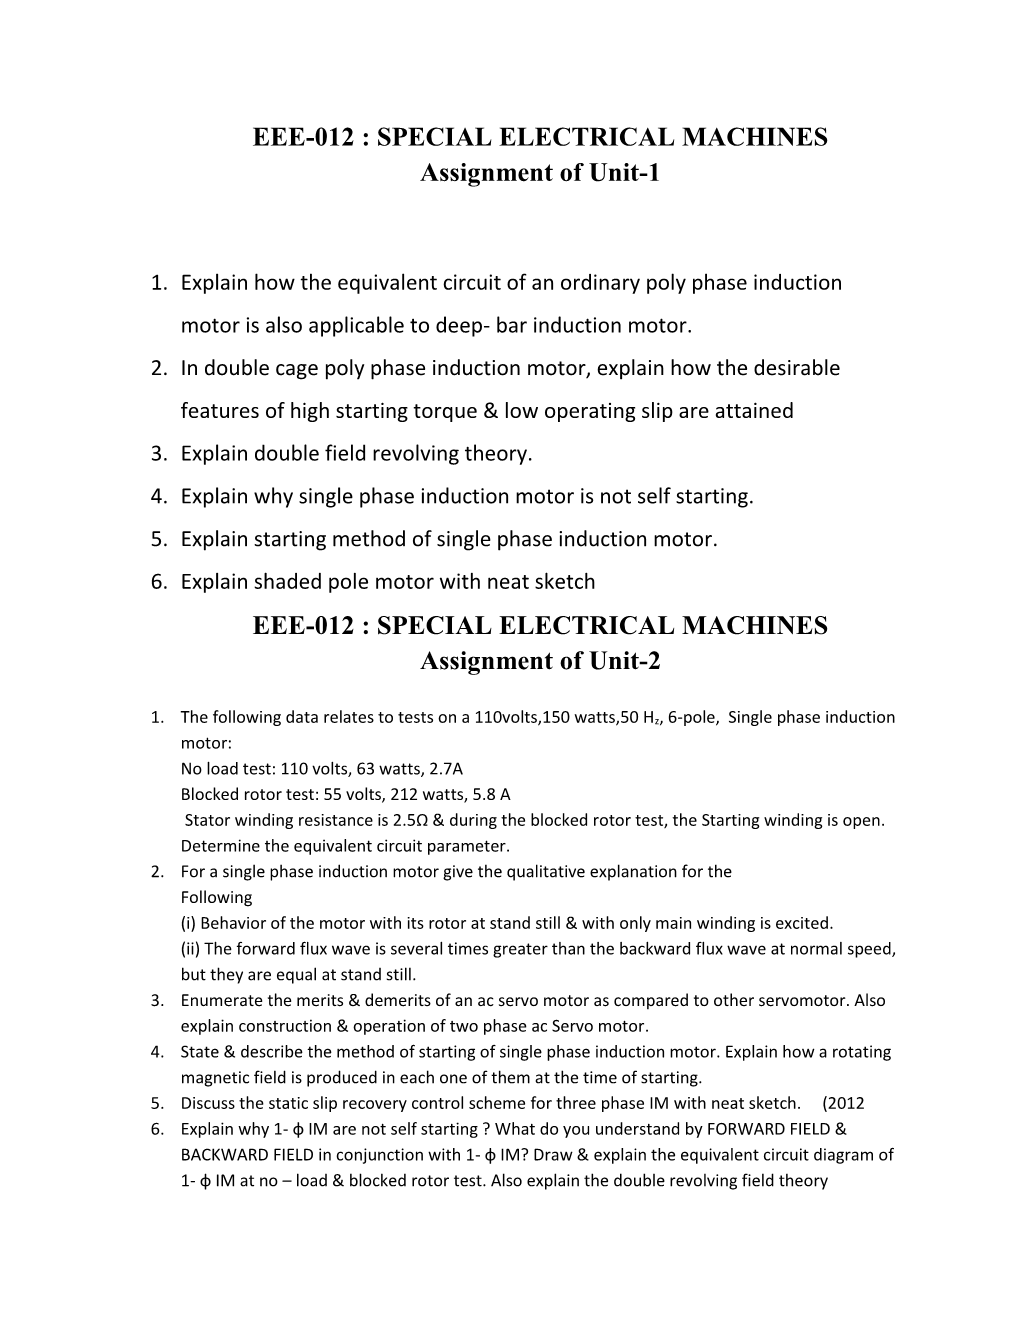 SPECIAL ELECTRICAL MACHINES Assignment of Unit-2